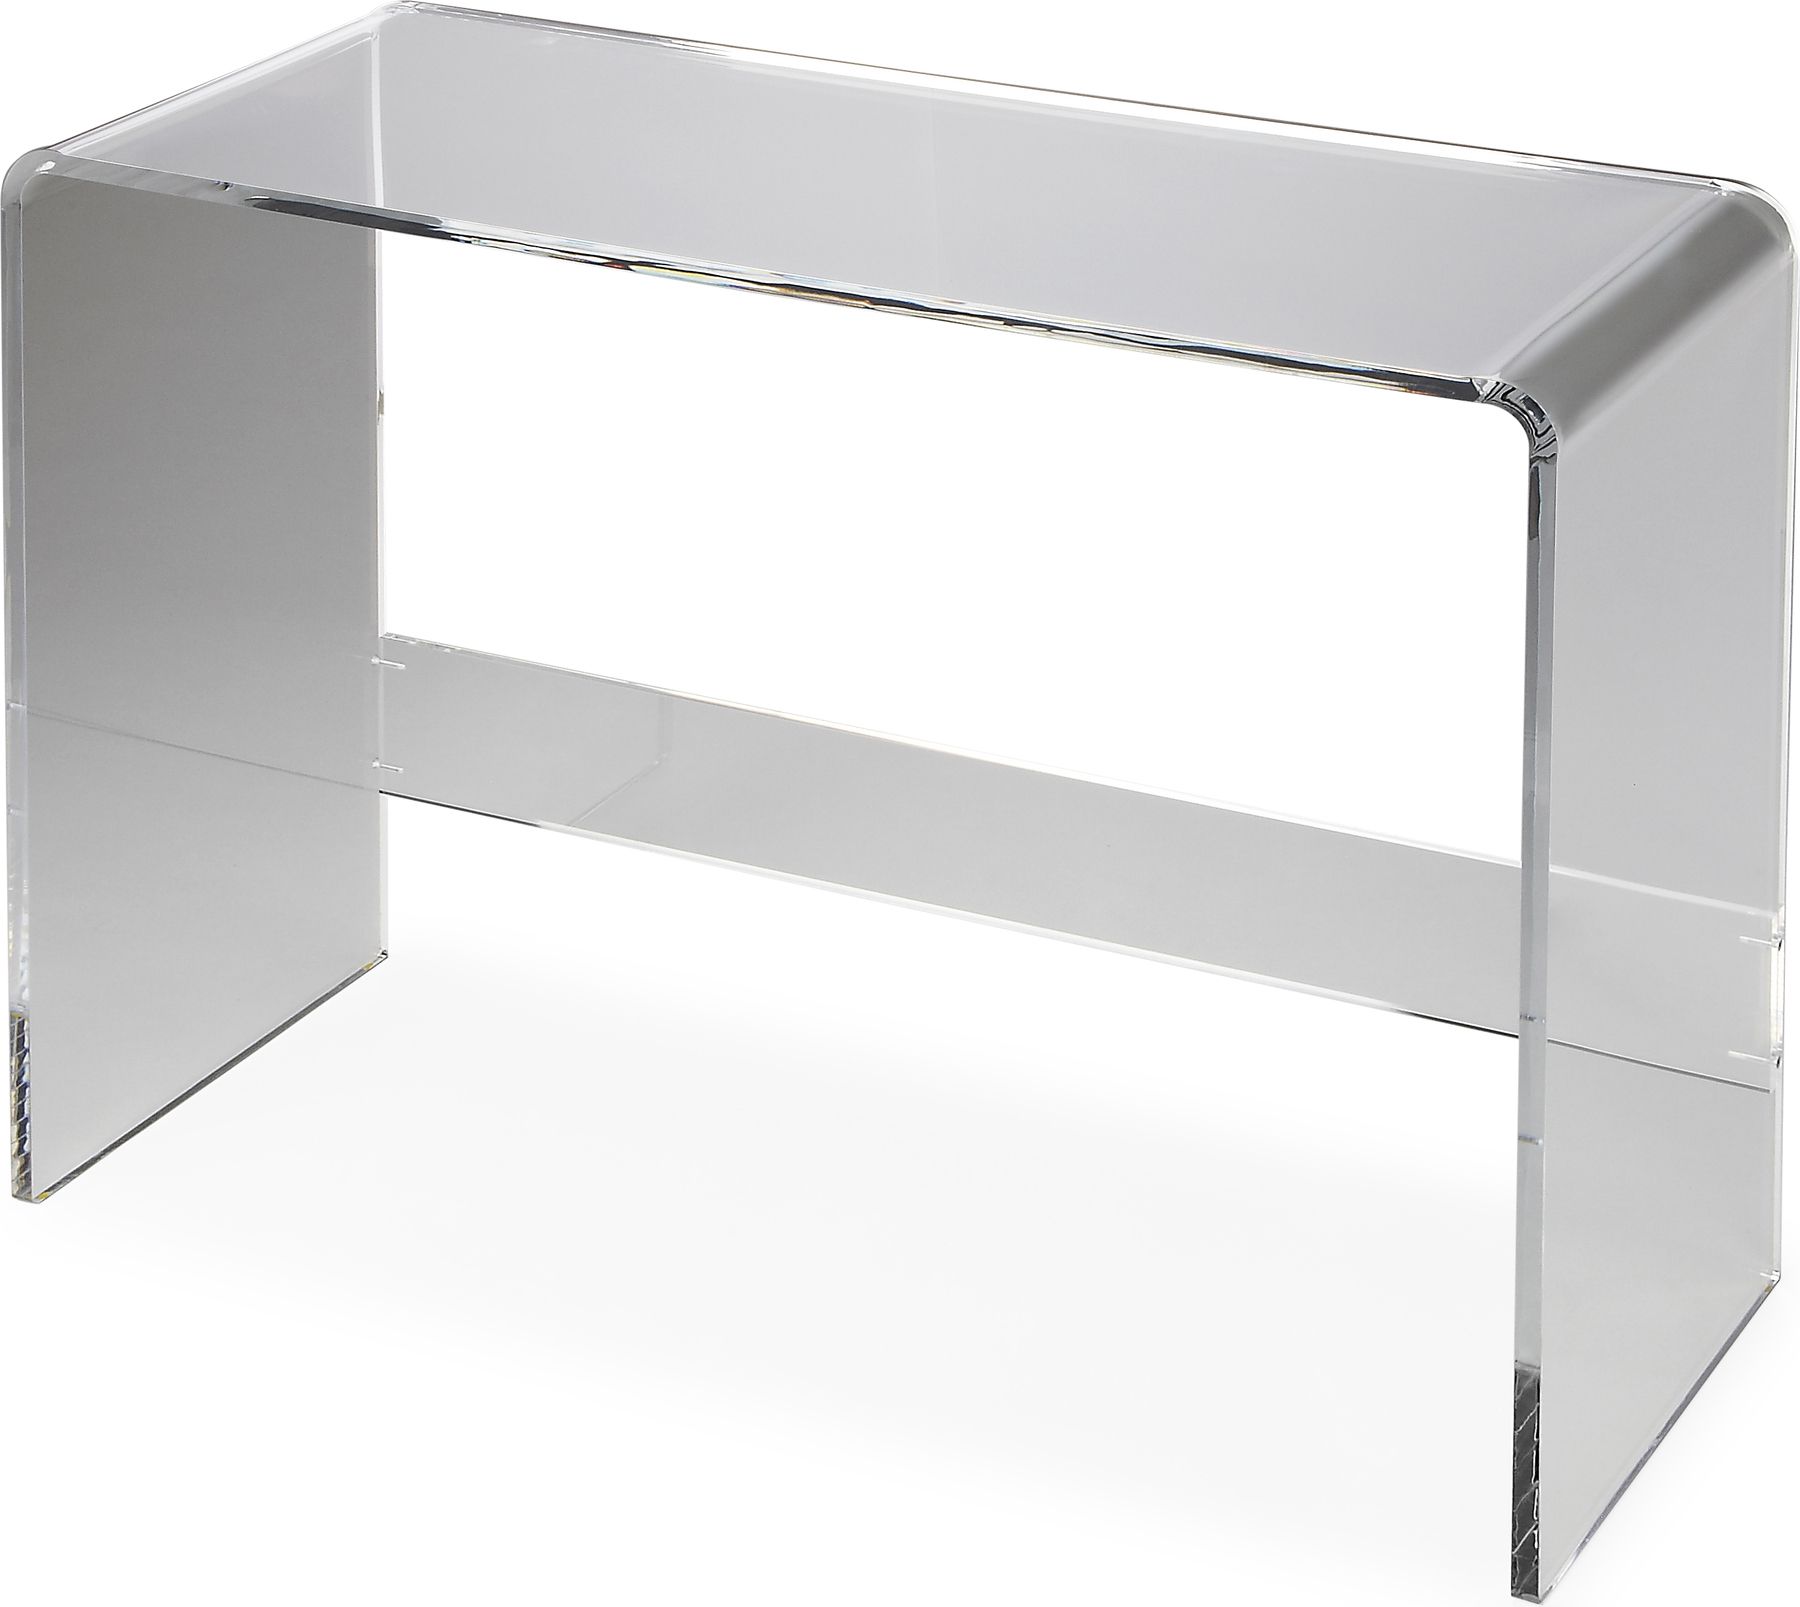 Crystal Acrylic Console Table | Hedgeapple Throughout Clear Console Tables (View 6 of 20)